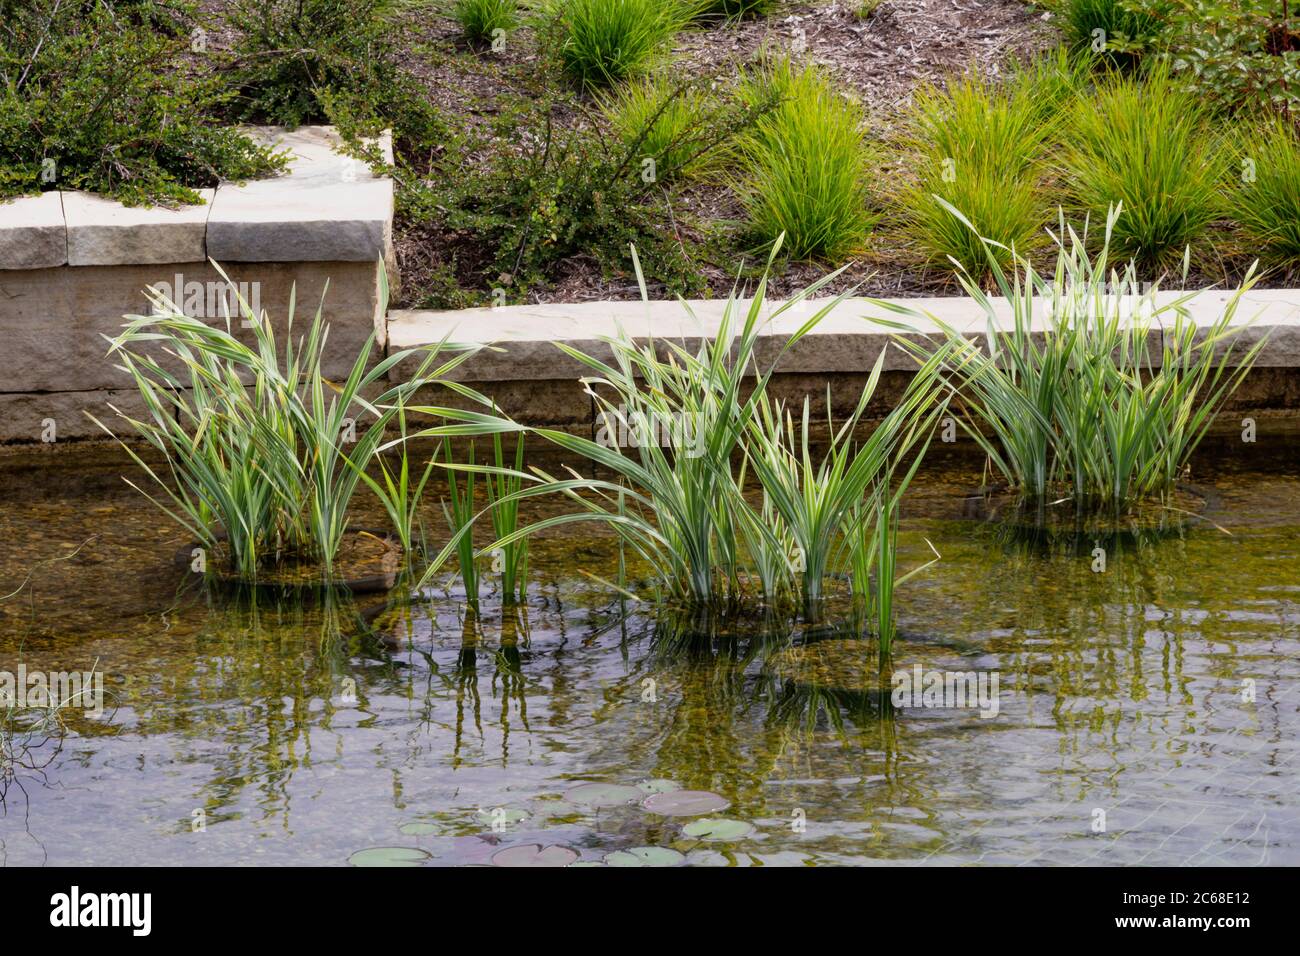 Sweet Flag (Acorus calamus variegatus) in a shallow pond in front of a decorative retaining wall and landscaped hill Stock Photo